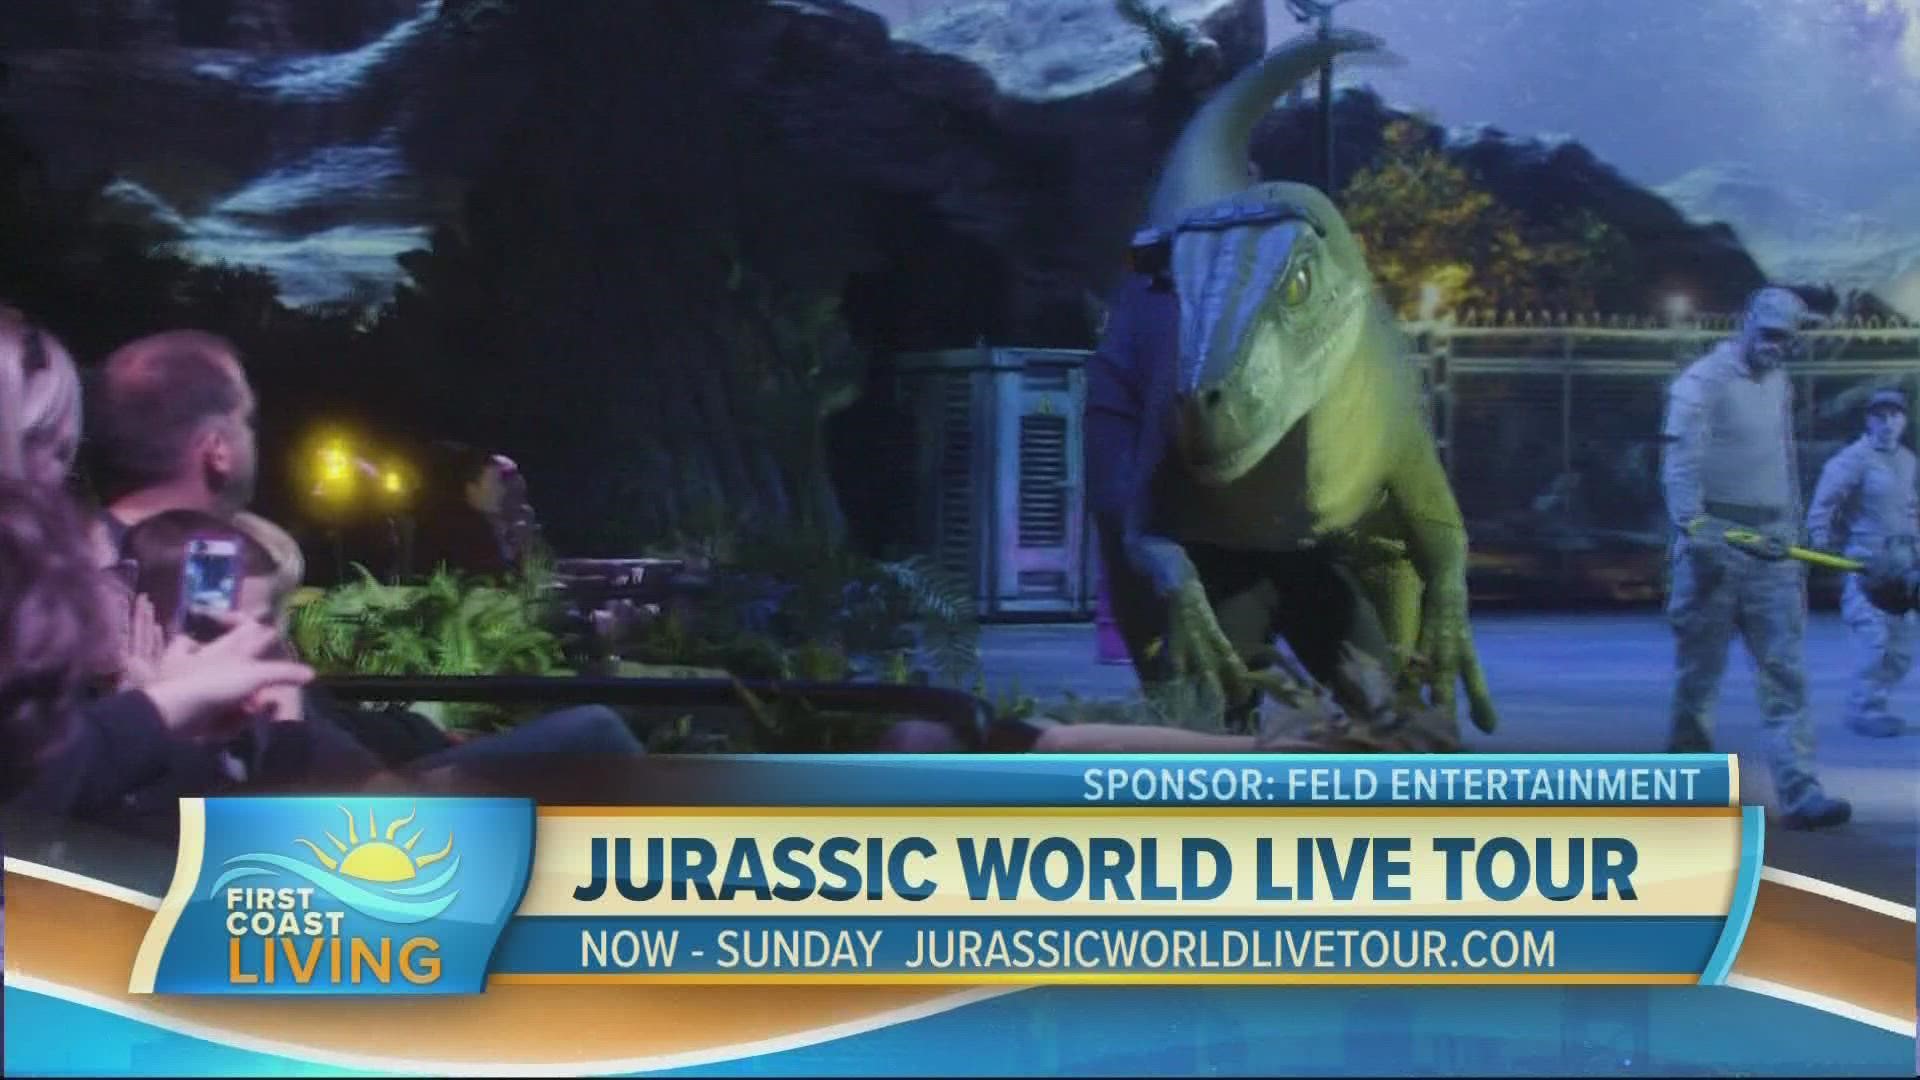 The Jurassic World Live Tour is an action-packed, live arena show that's coming to the VyStar Veterans Memorial Arena Jan. 27th - 29th.